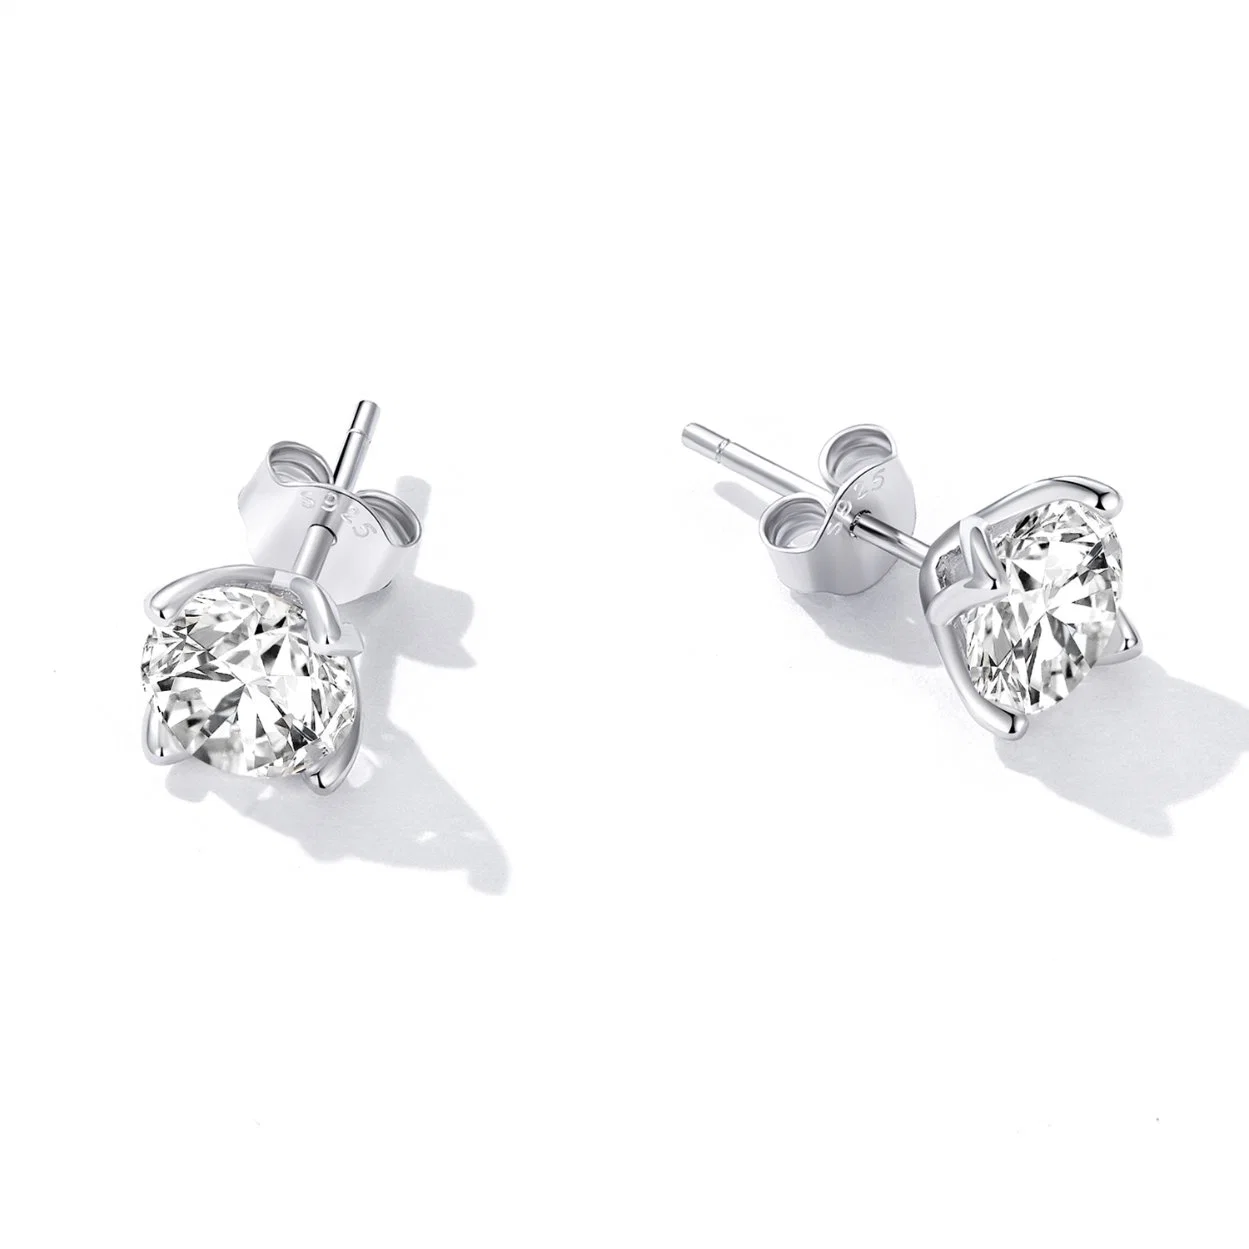 Novo 925 Sterling Silver Moissanite 0,5CT 1CT 5mm 6 mm Round Mulheres Earring Jóias